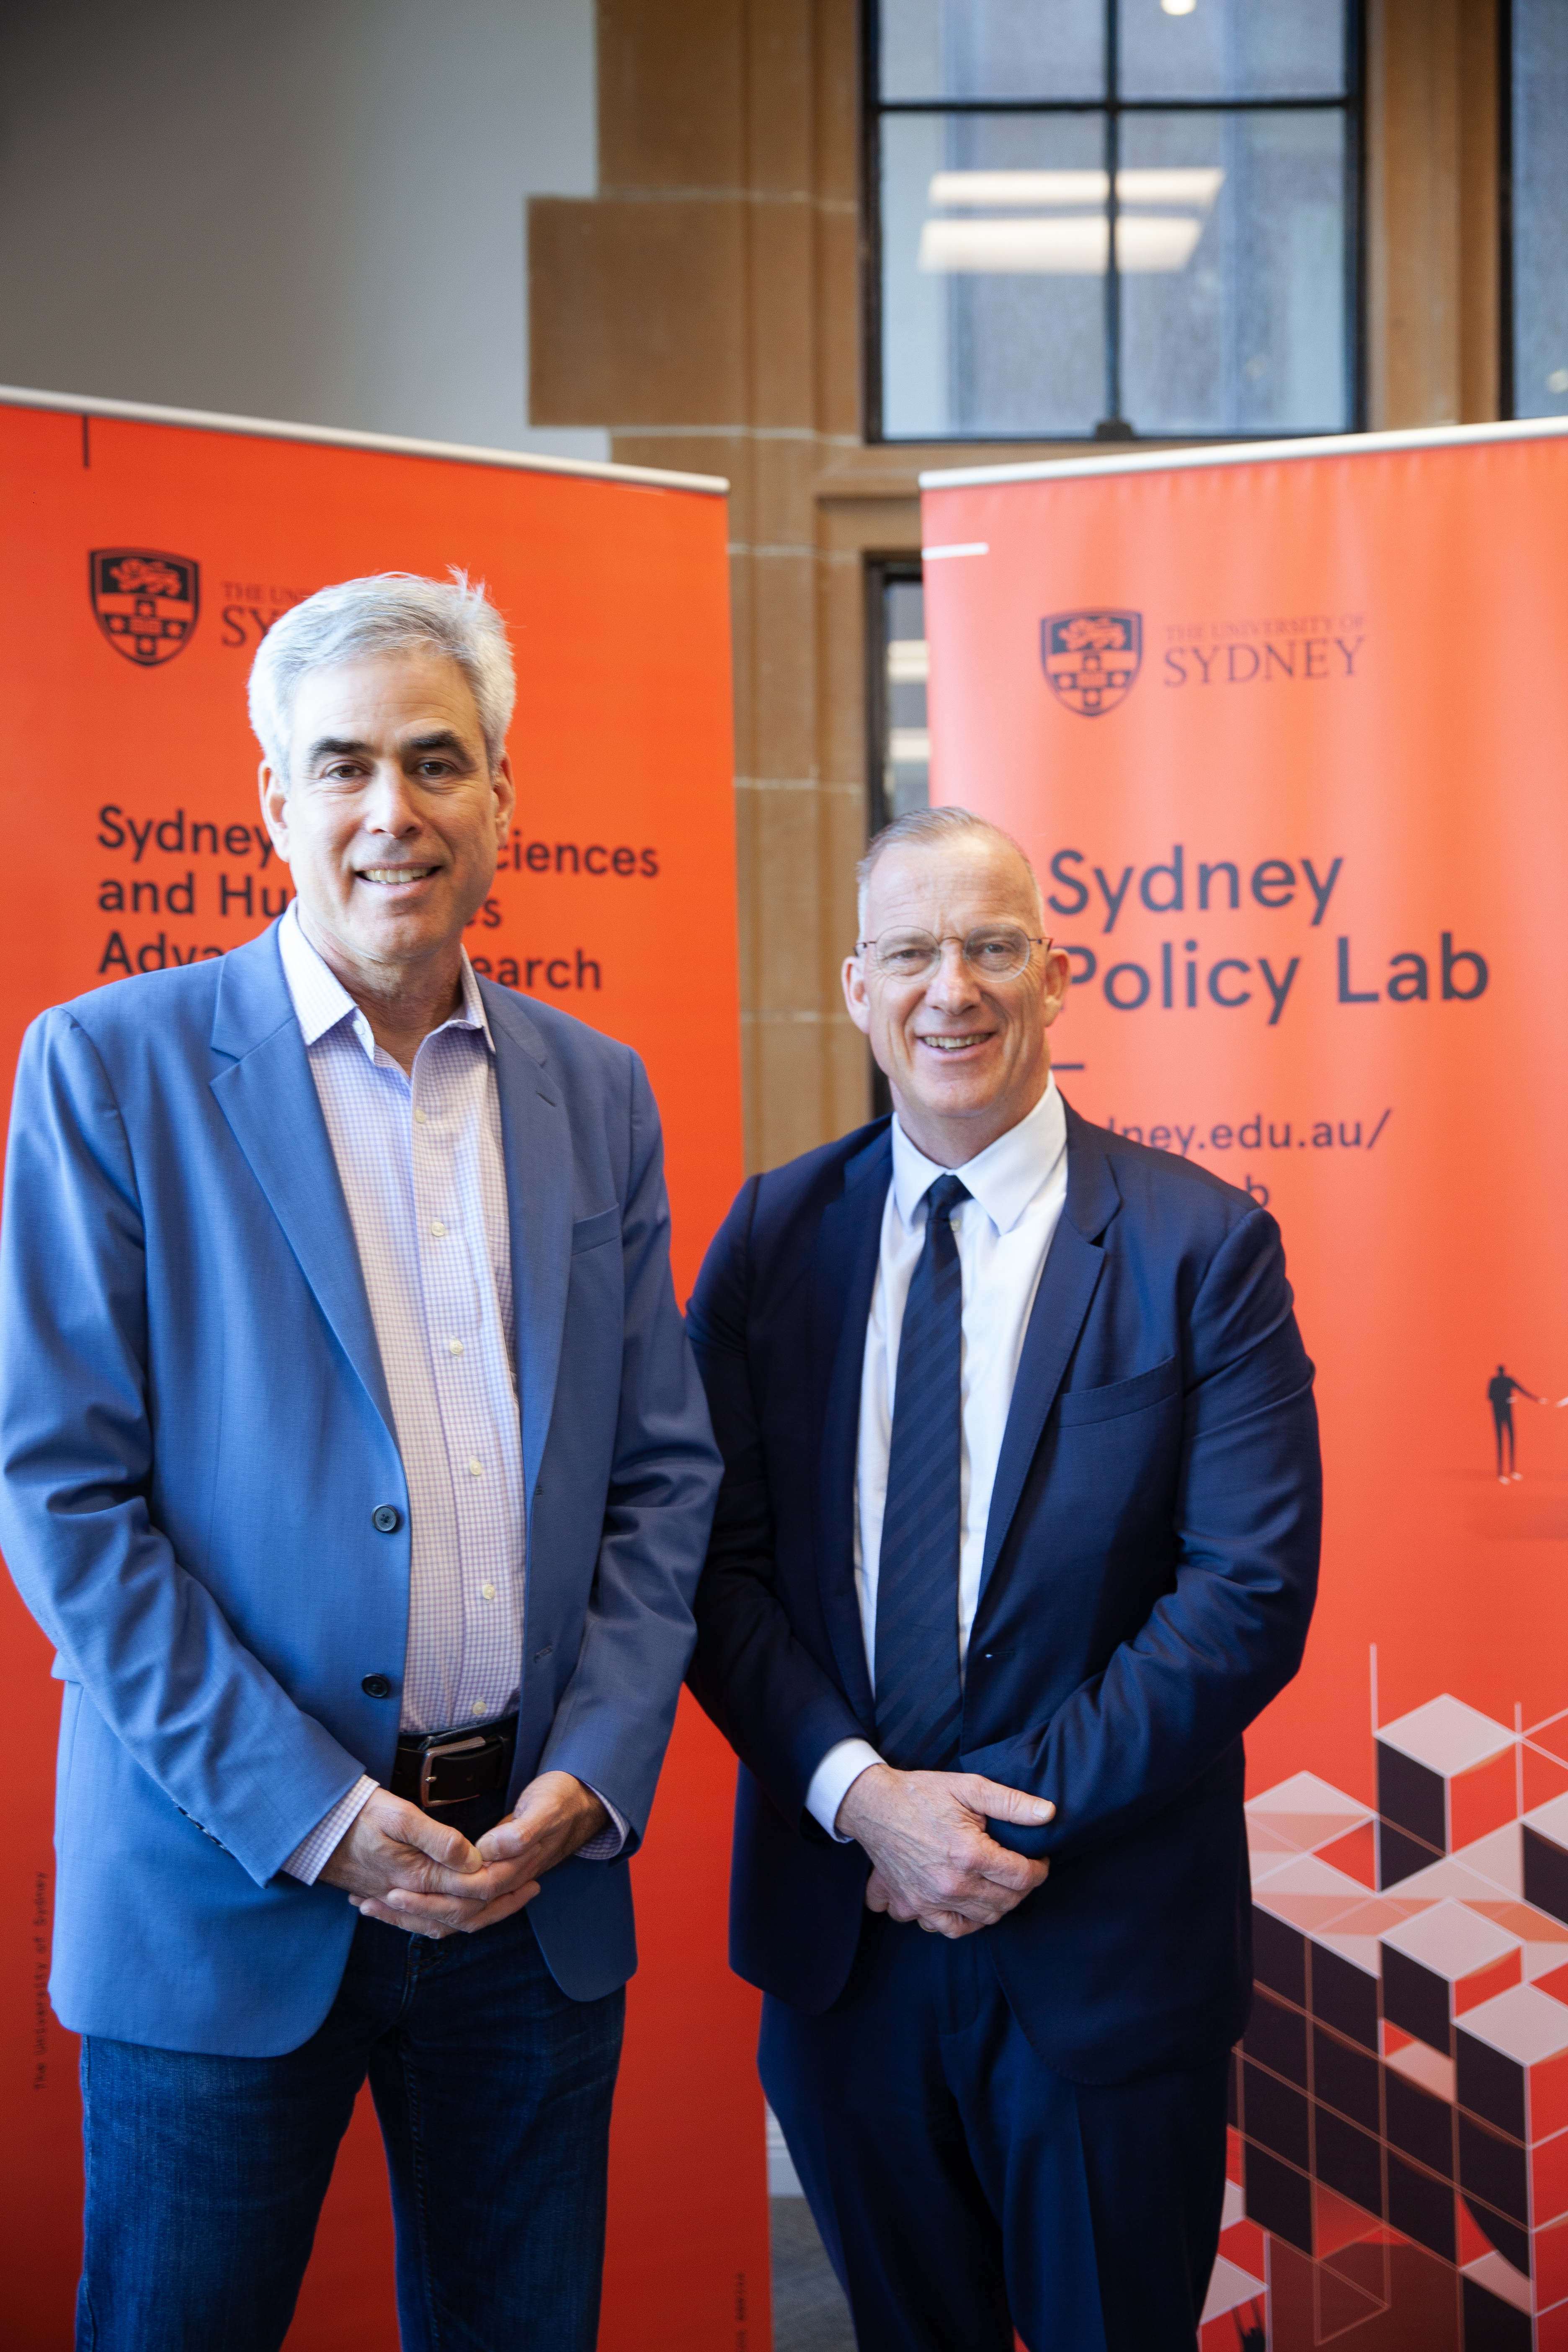 Professor Jonathan Haidt with University of Sydney Vice Chancellor and Principal Dr Michael Spence